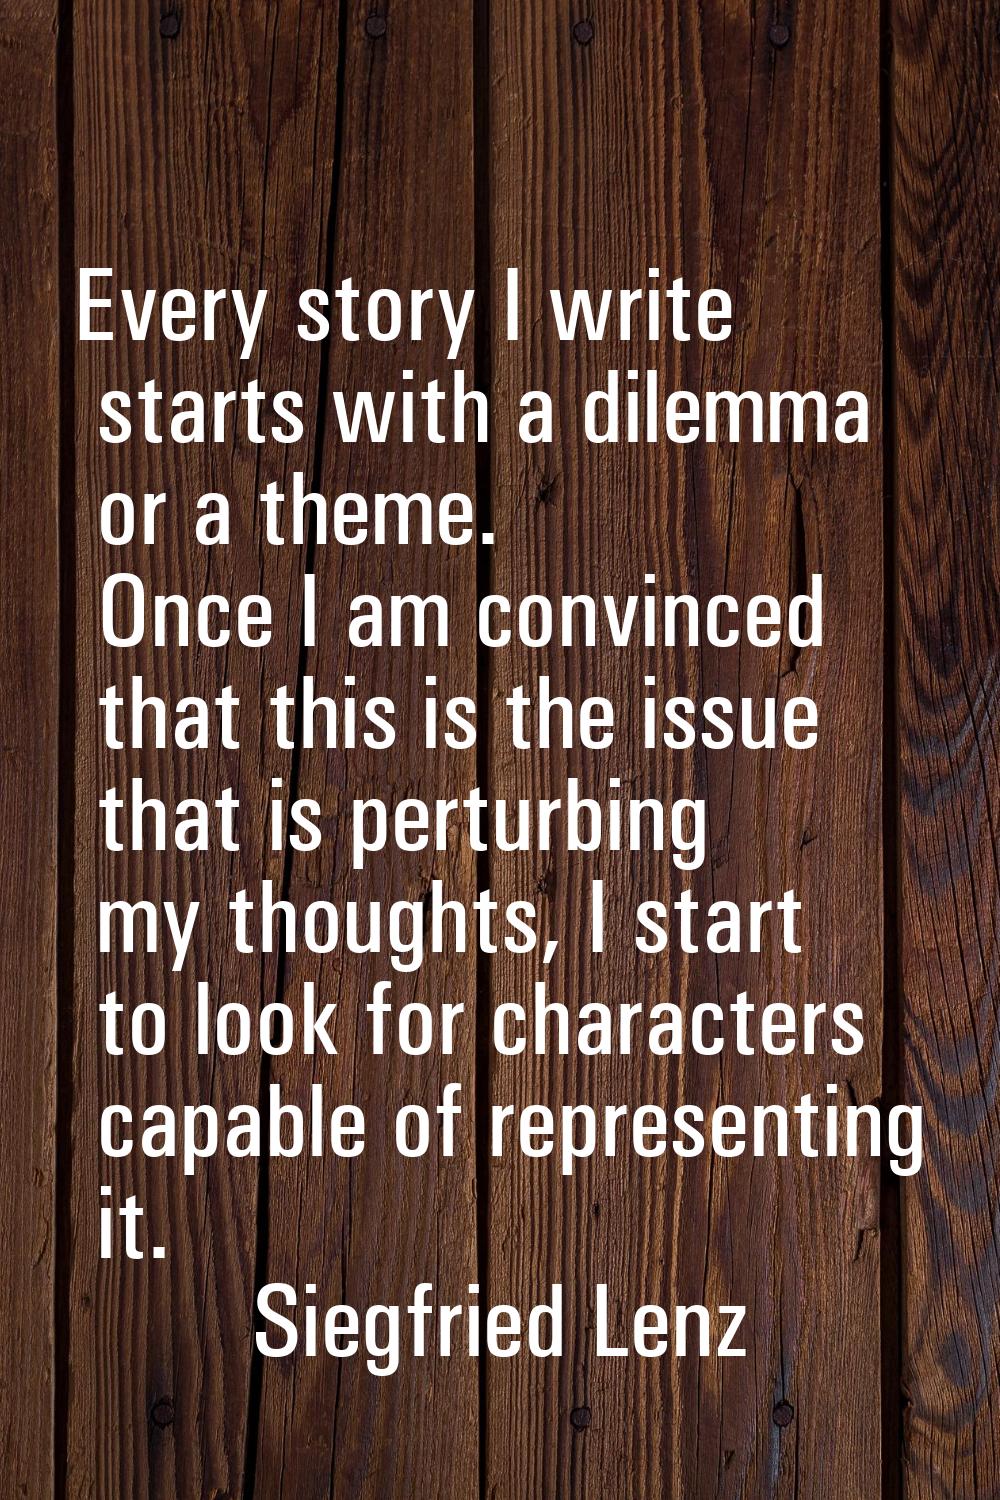 Every story I write starts with a dilemma or a theme. Once I am convinced that this is the issue th